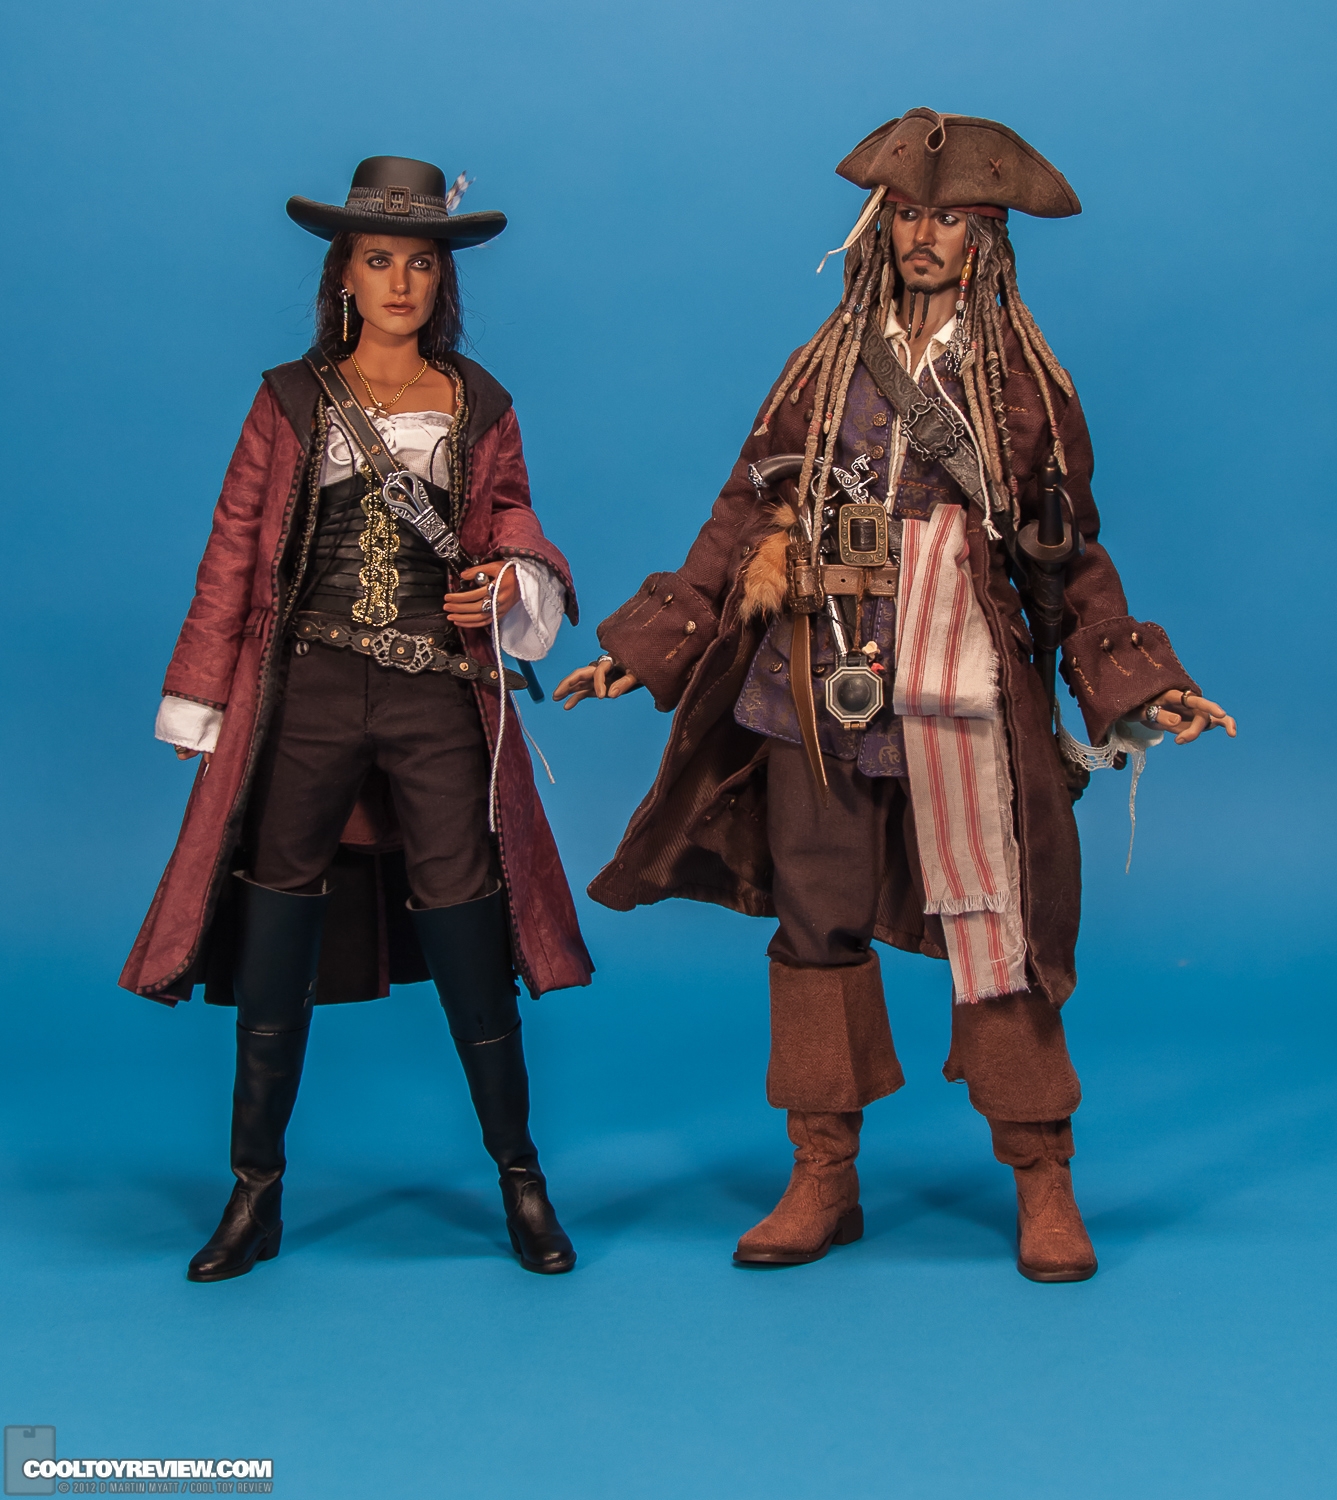 Angelica_Disney_Pirates_Of_The_Caribbean_Hot_Toys-35.jpg